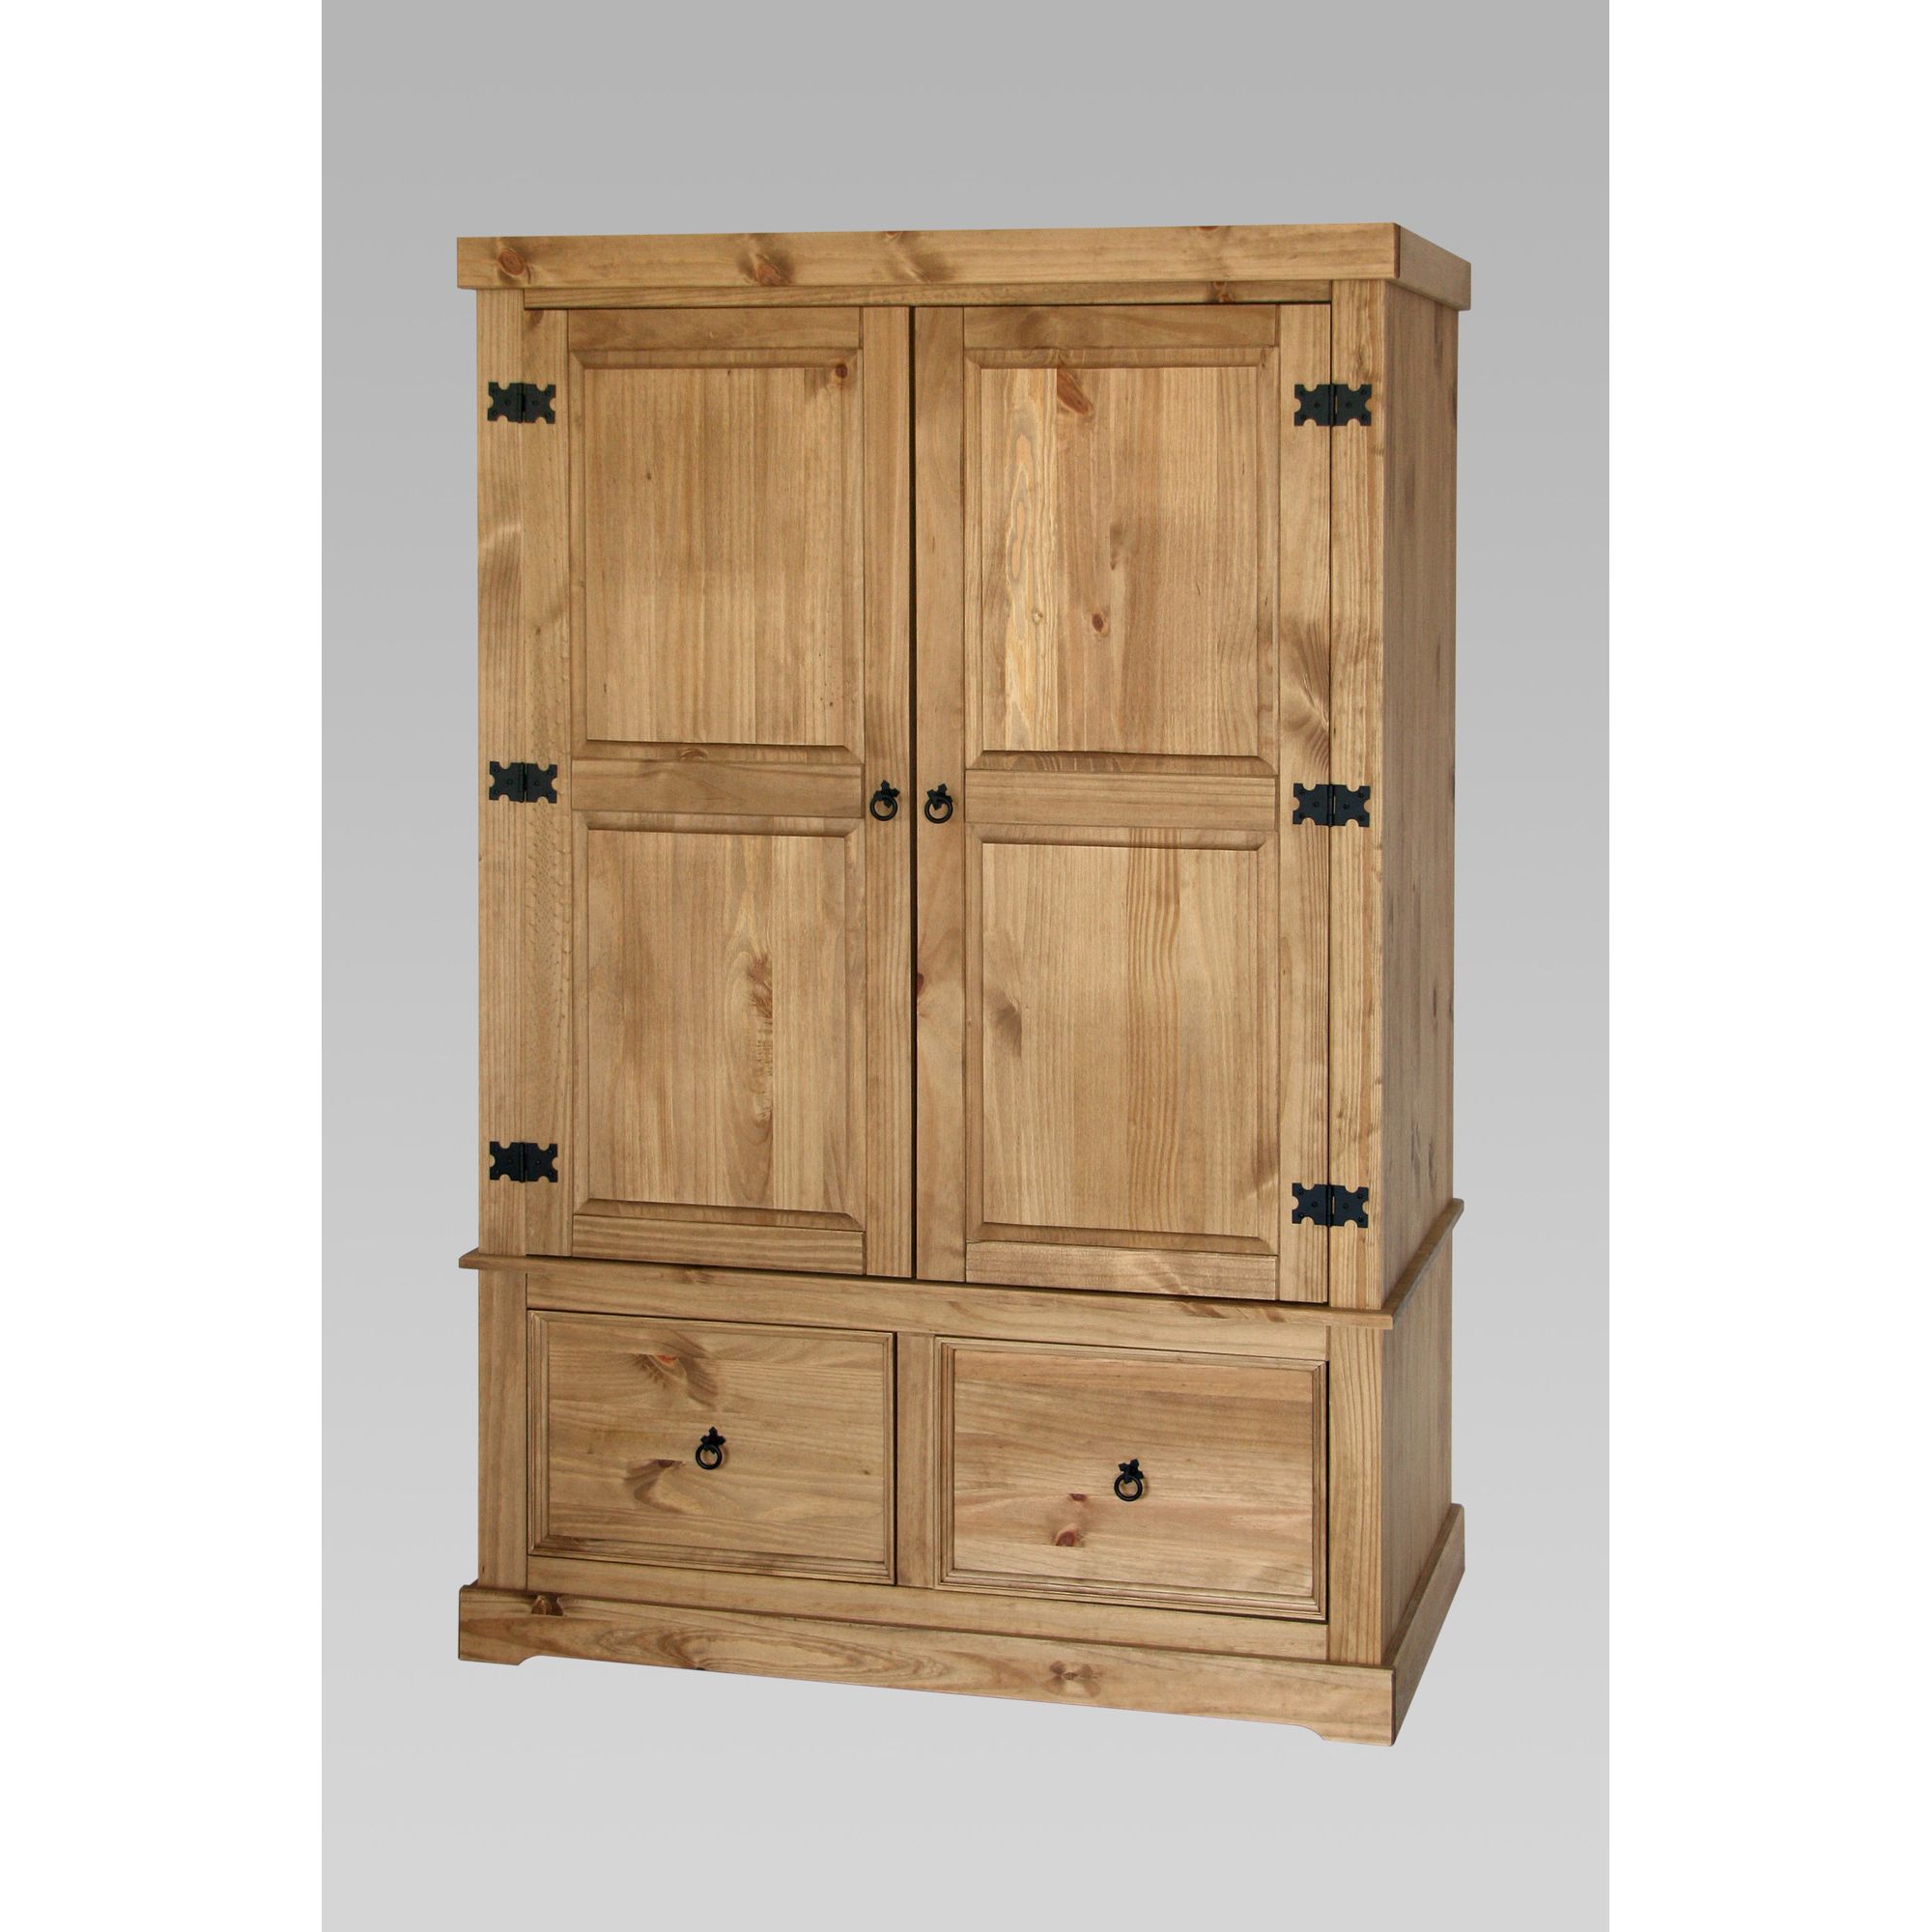 Home Essence Windmill 2 Drawer Wide Wardrobe in Solid Pine at Tesco Direct